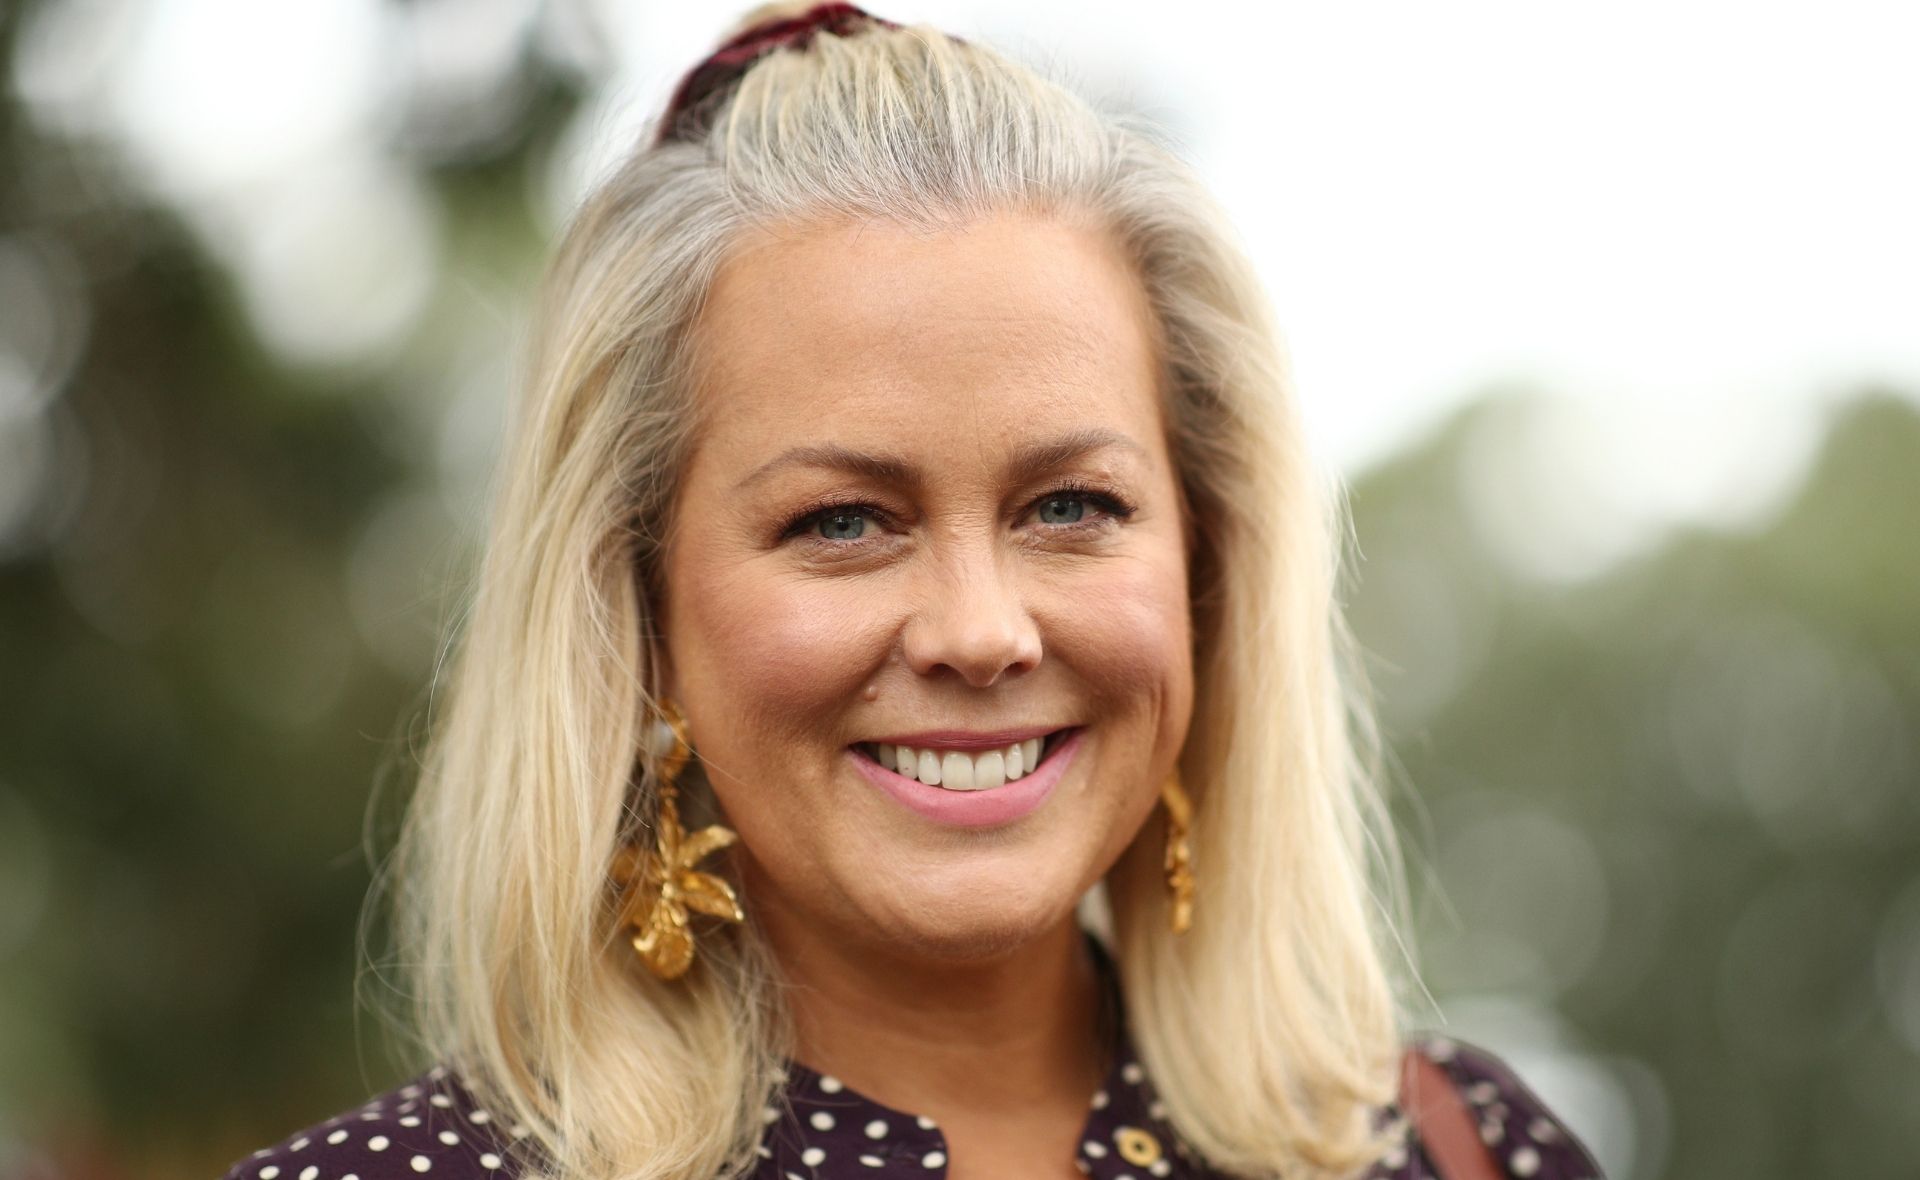 Sam Armytage says she would be “cancelled” by now if she stayed on Sunrise